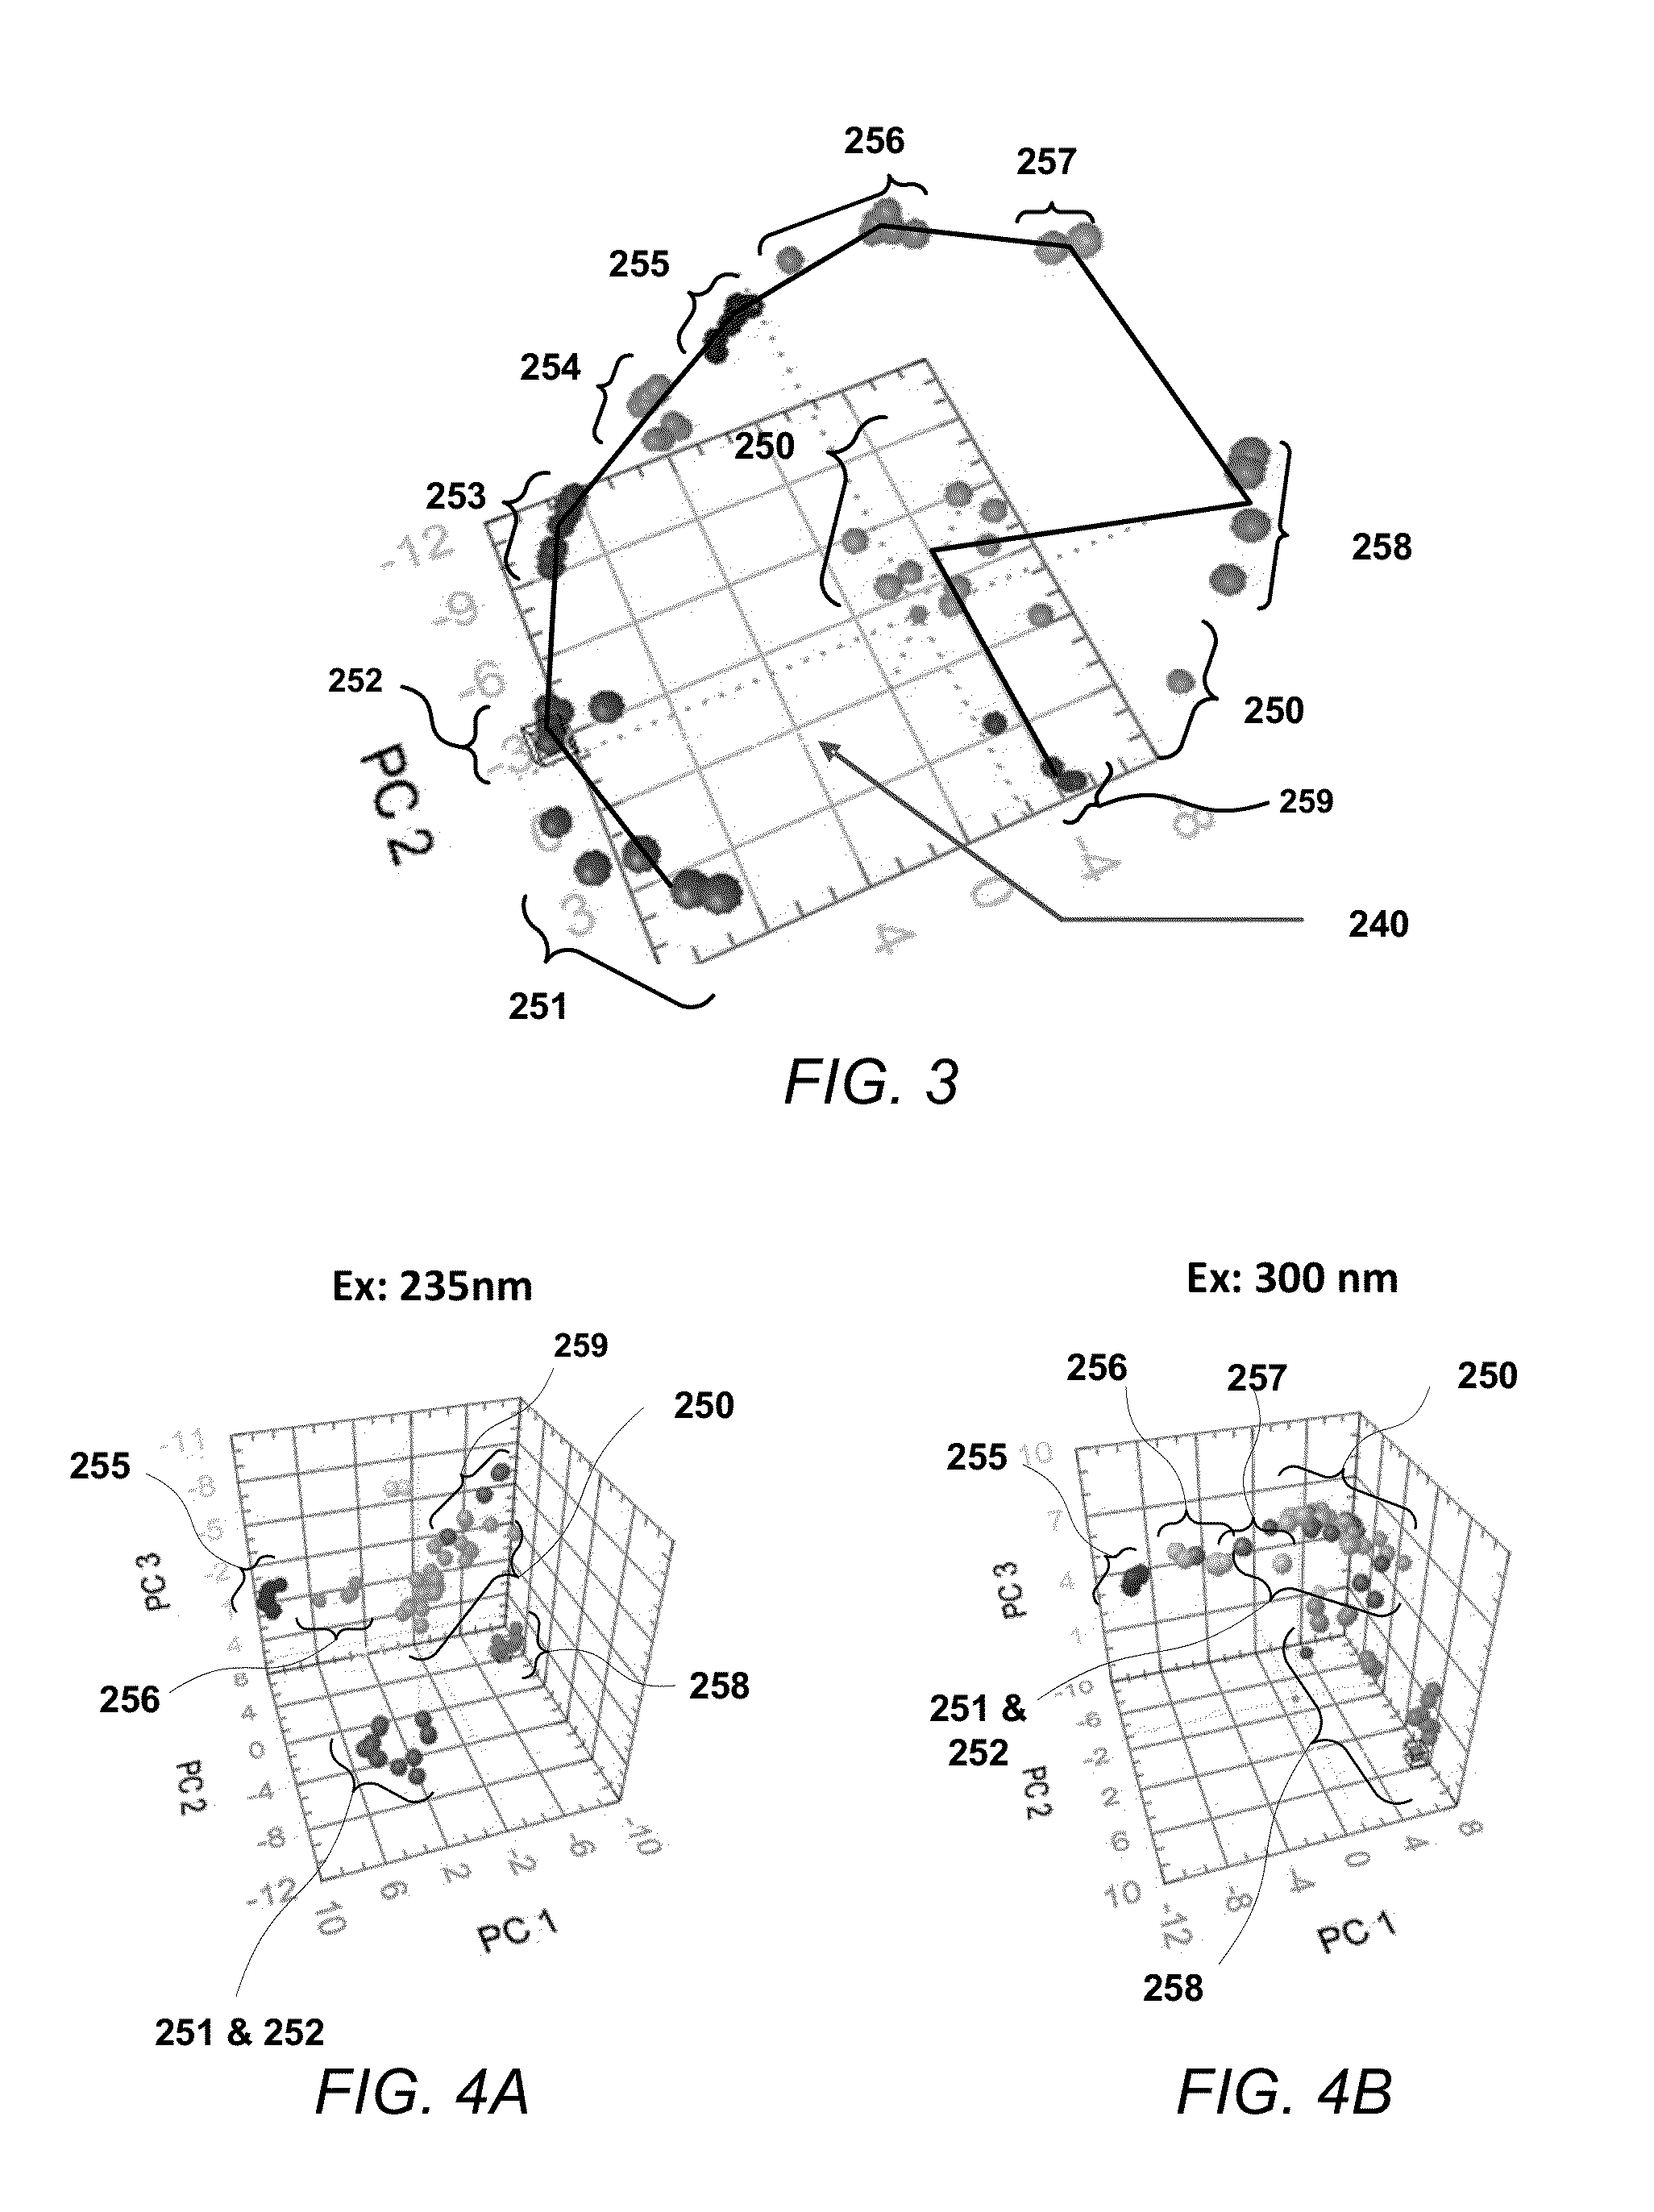 Native fluorescence detection methods, devices, and systems for organic compounds